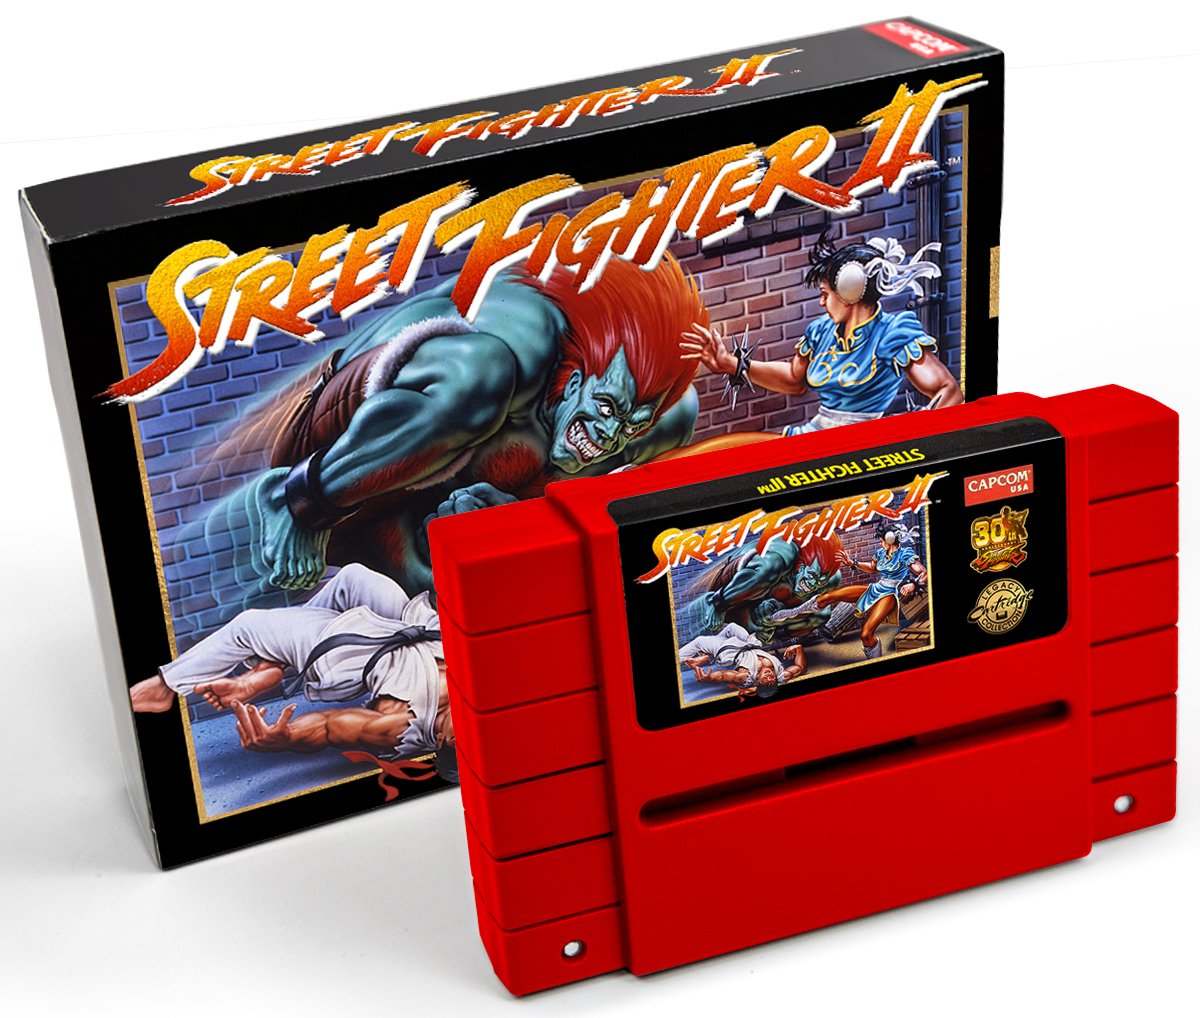 KARCANEWS – RERELEASE OF STREET FIGHTER 2 LIMITED COLLECTOR’S EDITION